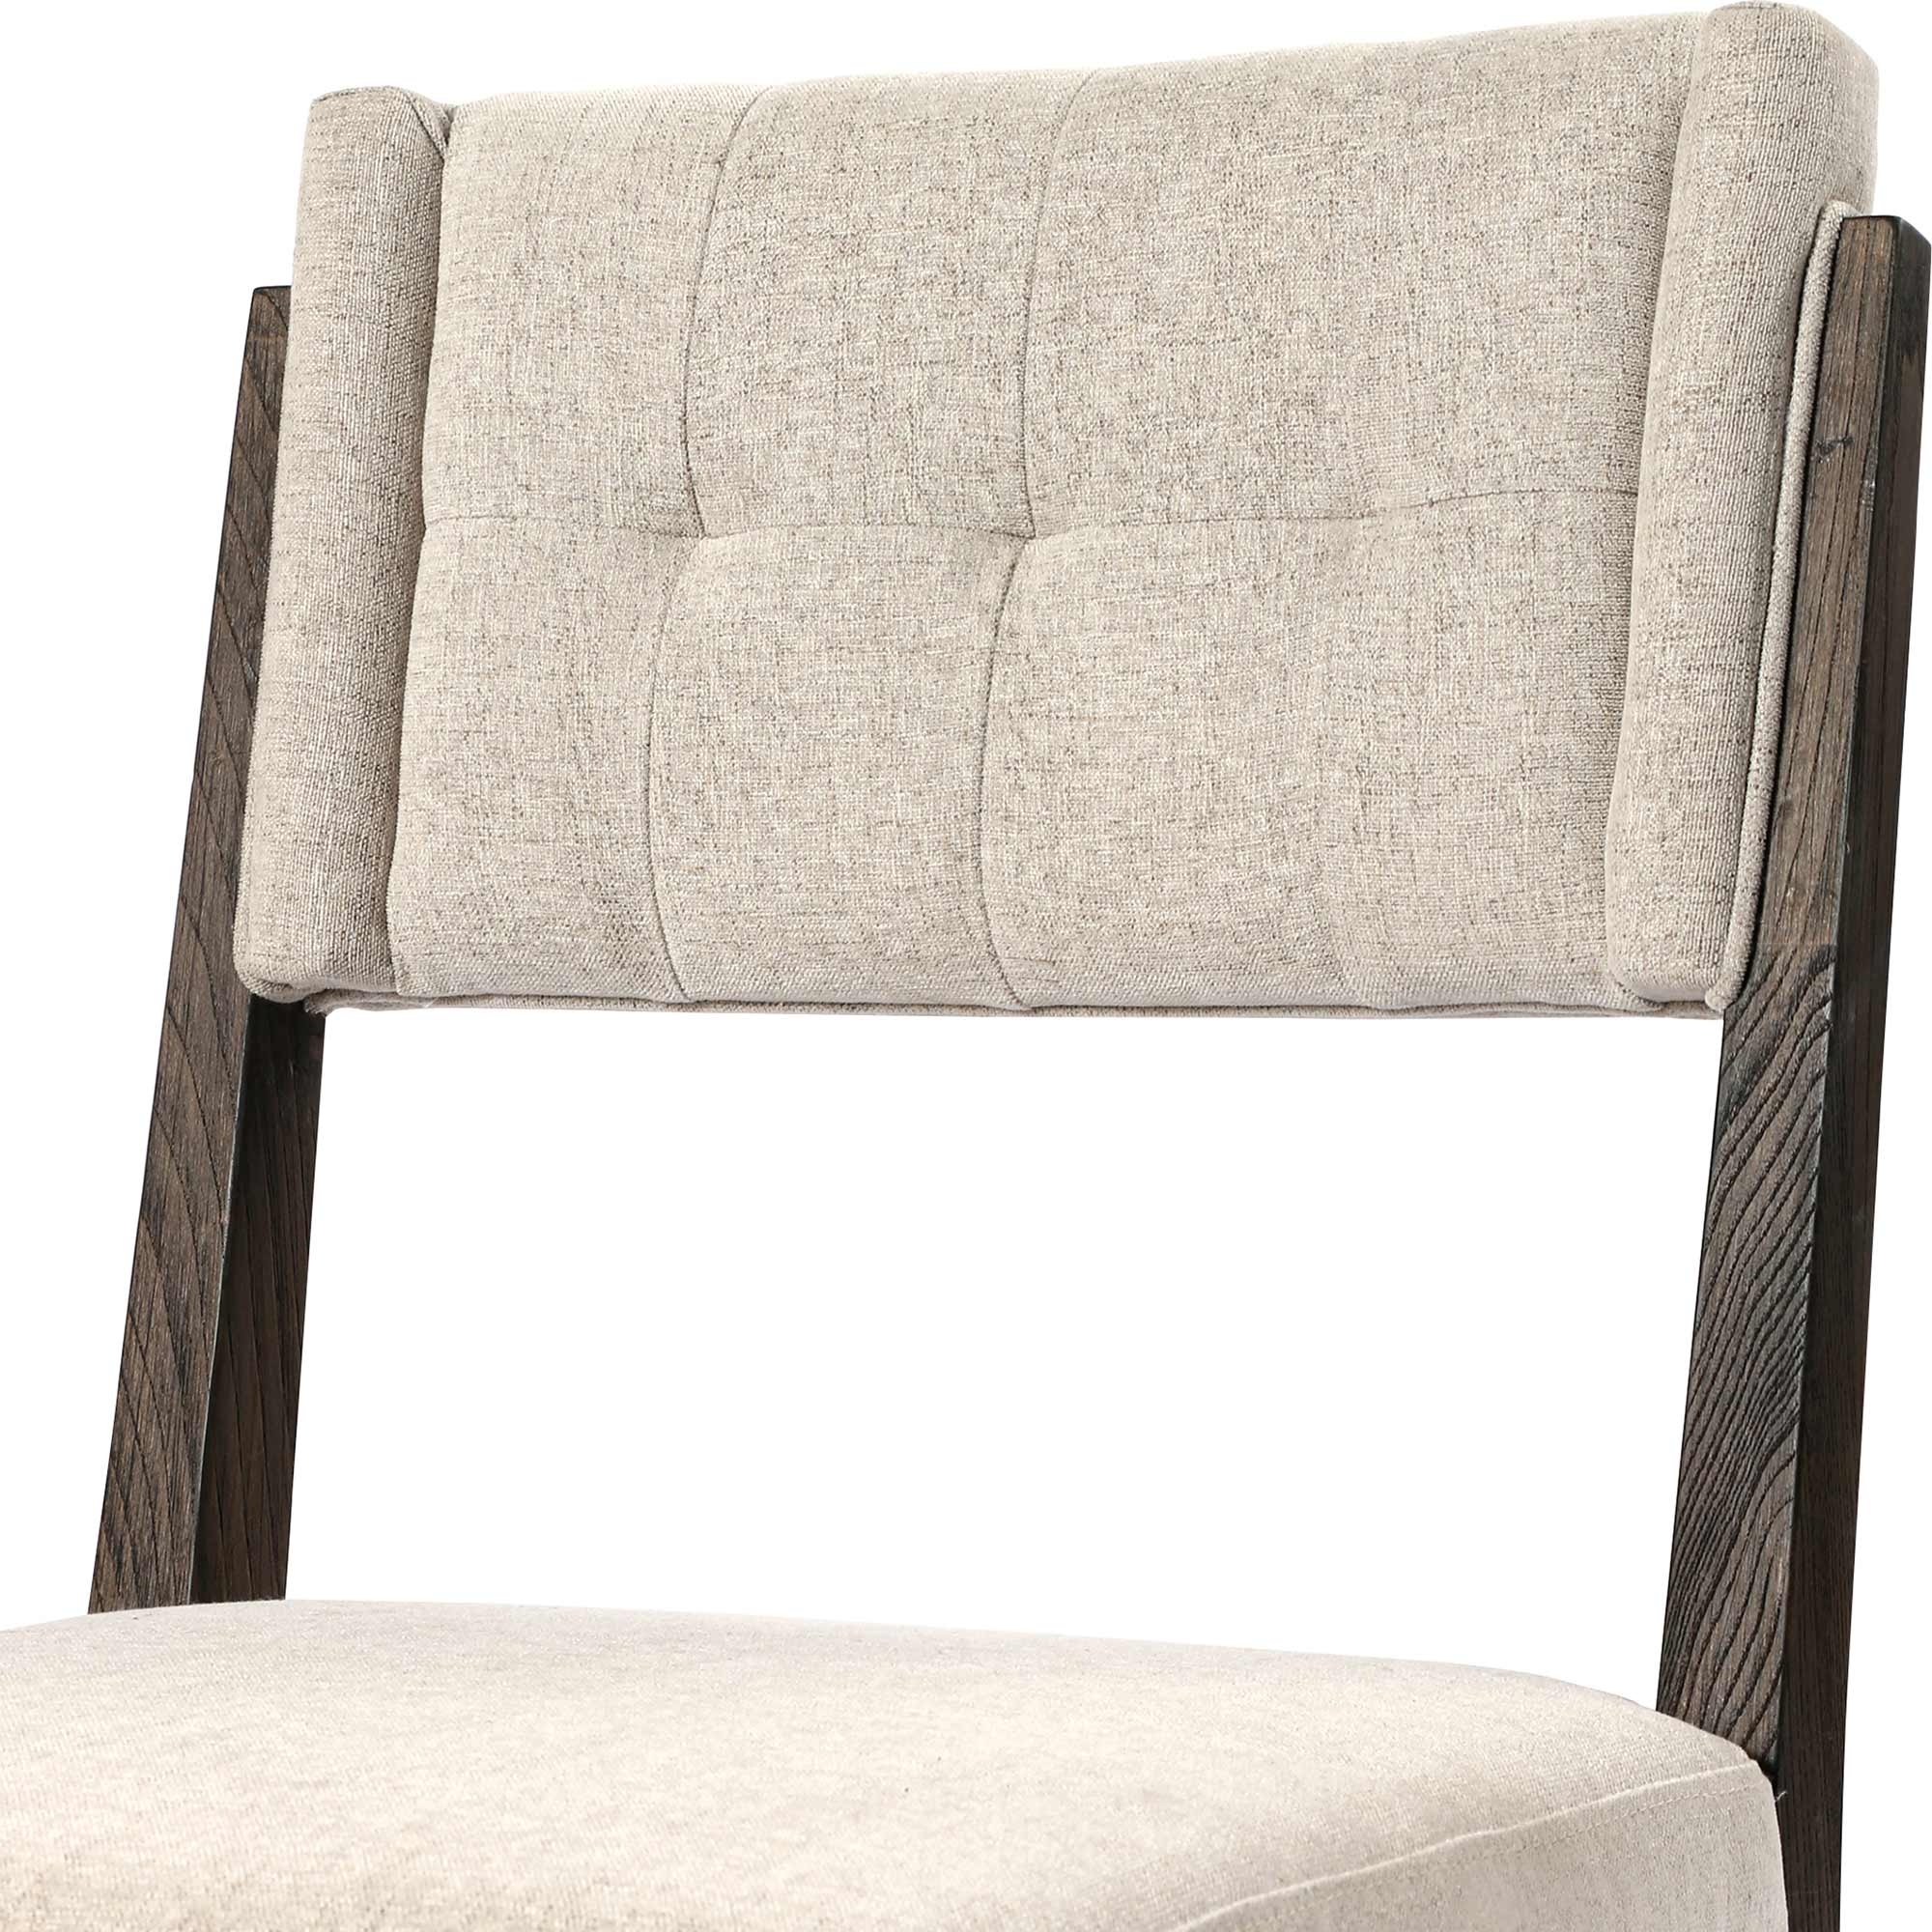 Arlene French Country Tuffed Beige Linen Upholstered Wood Dining Chair - Image 5